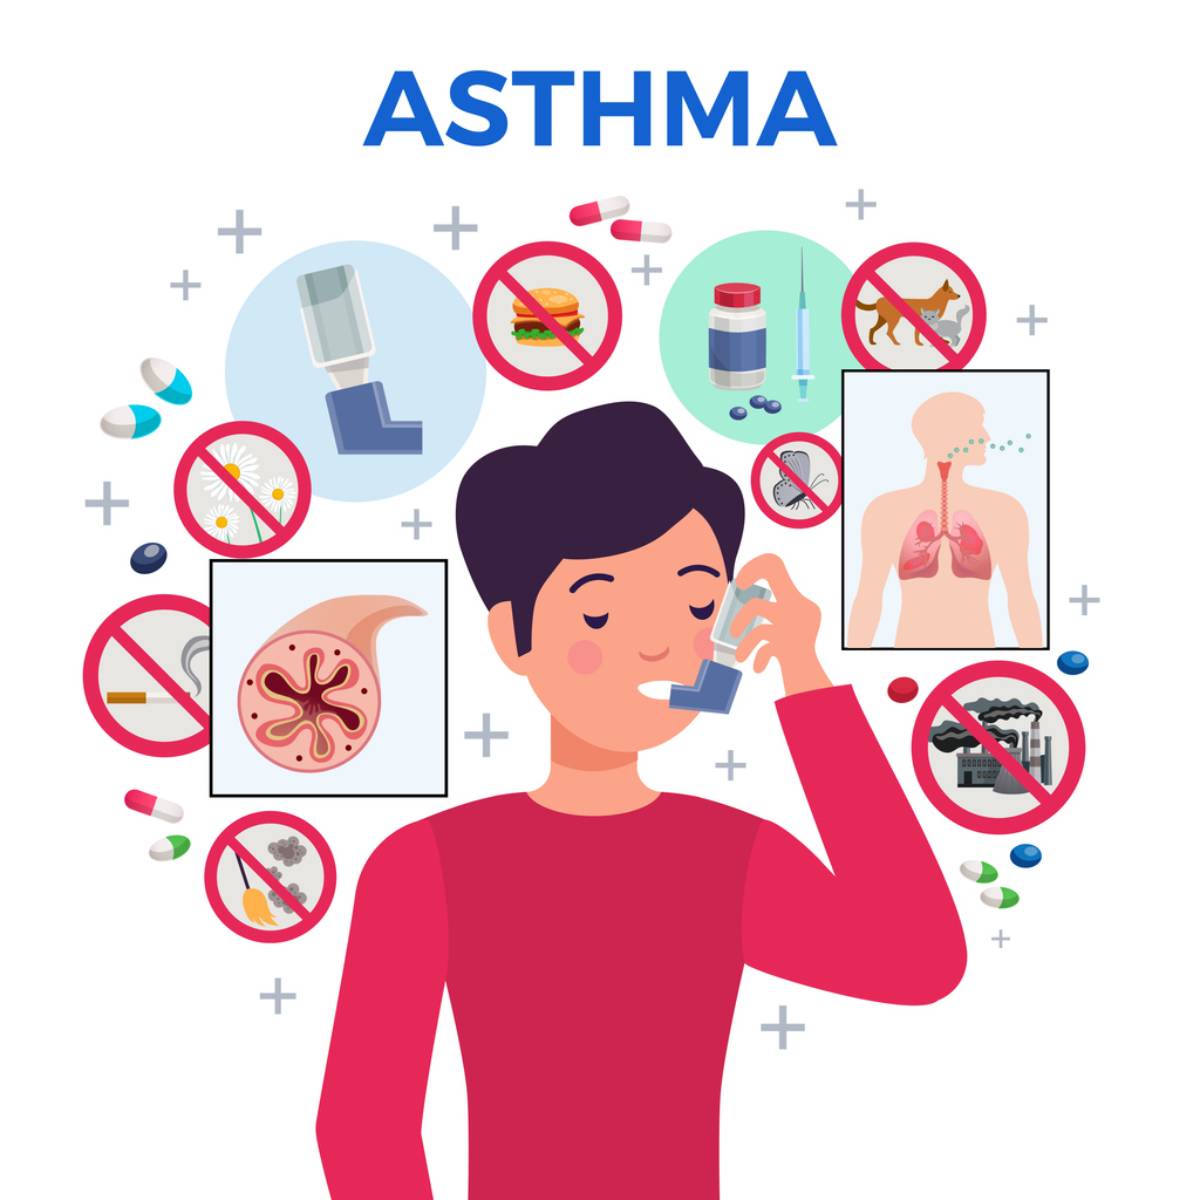 concept image of man controlling asthma